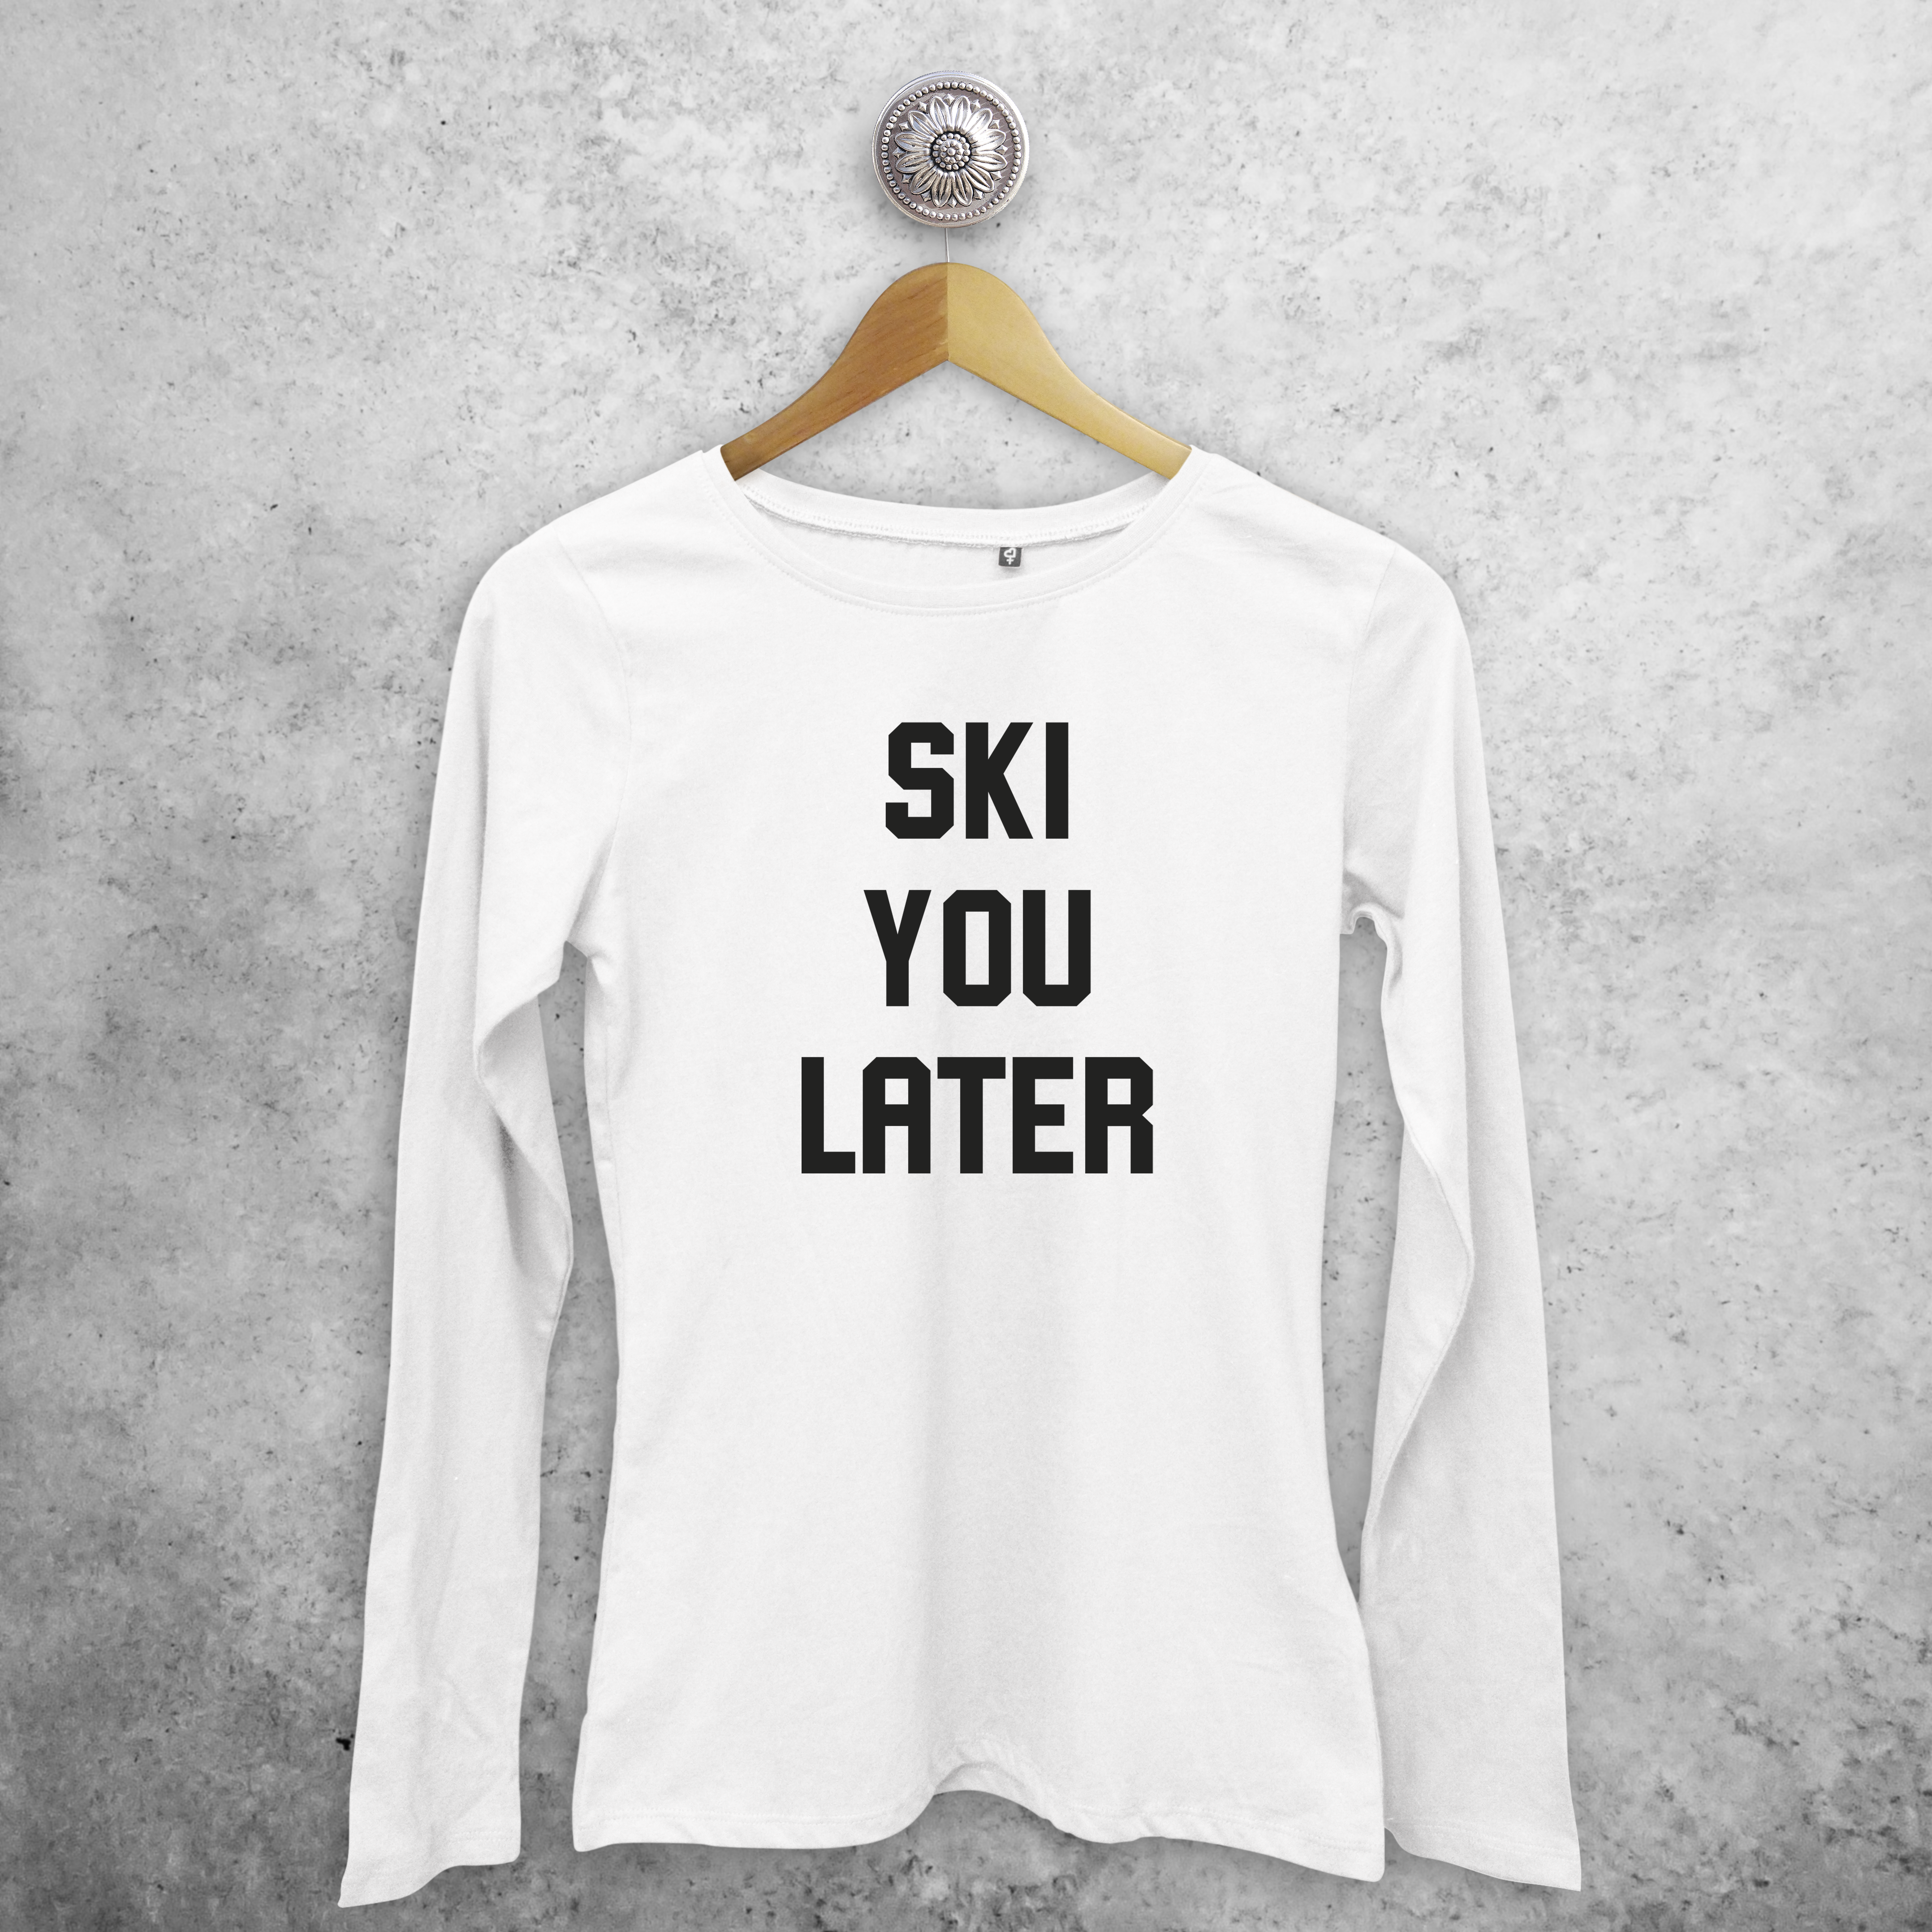 Adult shirt with long sleeves, with ‘Ski you later’ print by KMLeon.